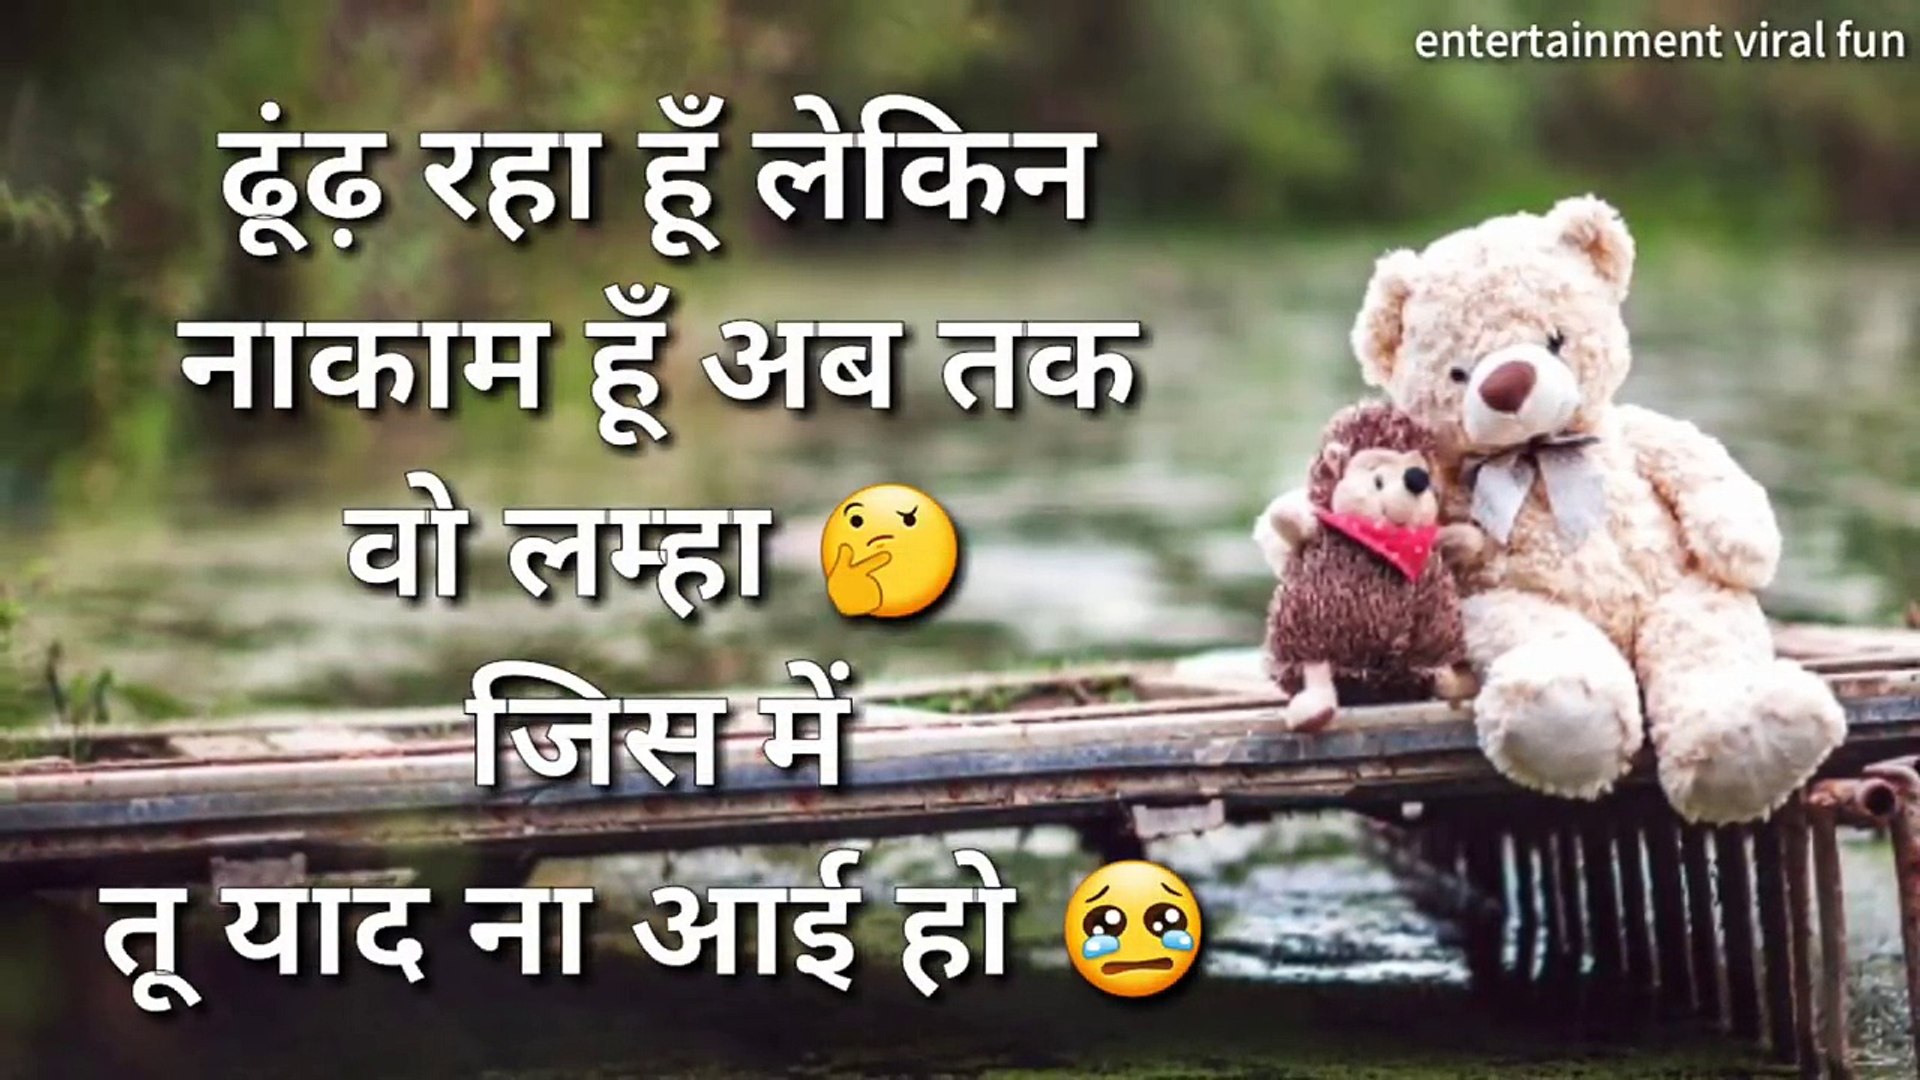 After Breakup - Sad Quotes  Whatsapp Status Video